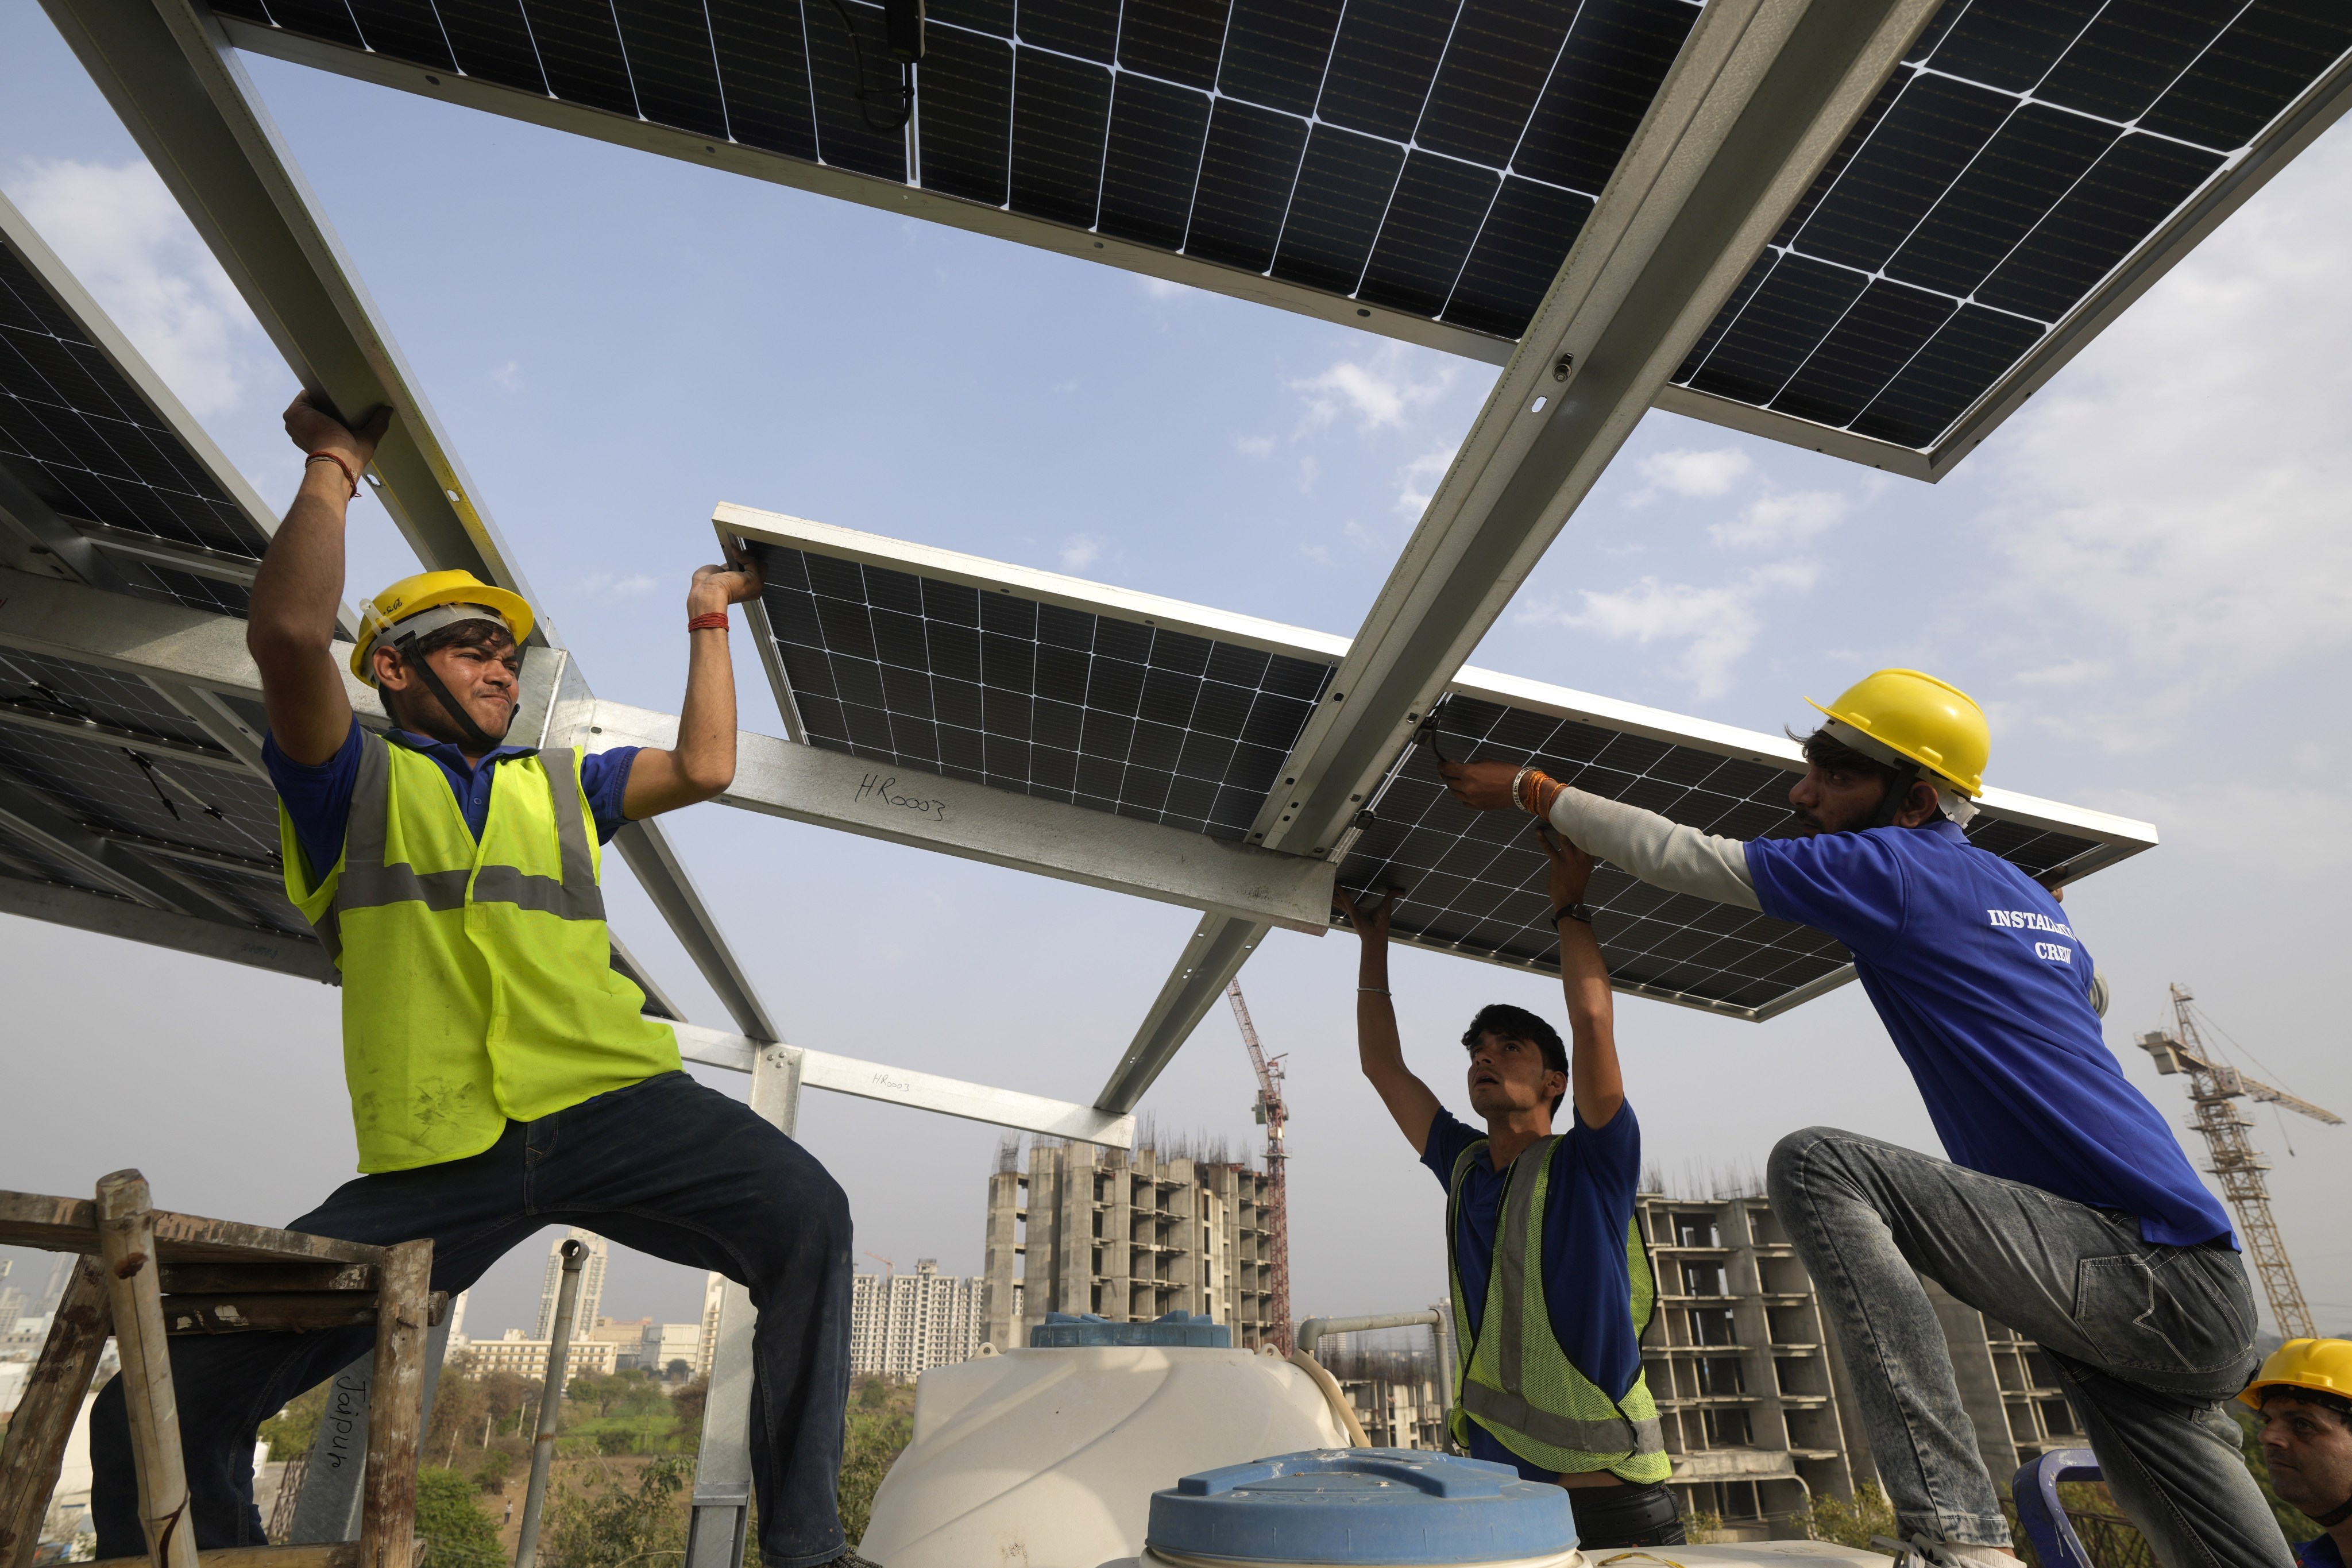 Workers put up a solar panel on the rooftop on the outskirts of New Delhi, India on February 20. Photo: AP